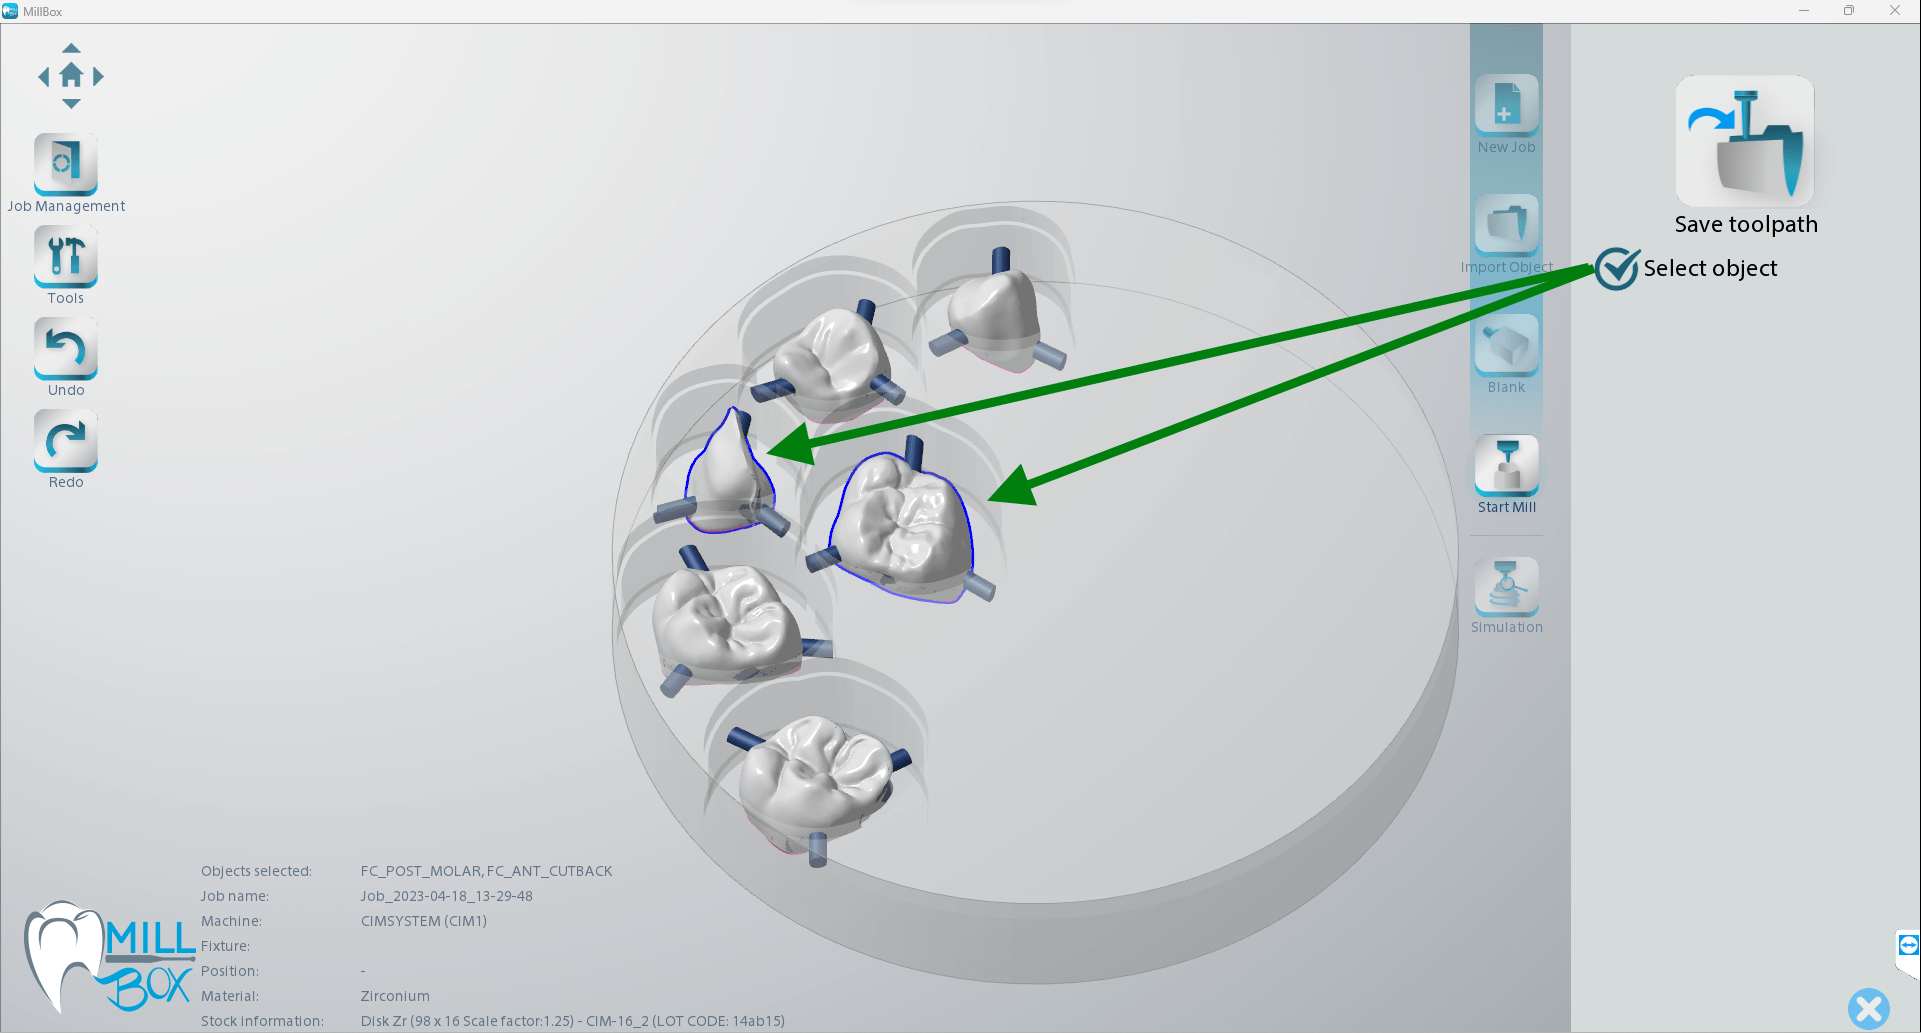 Image shows print screen of milling a selection of parts on the disc within millbox dental software